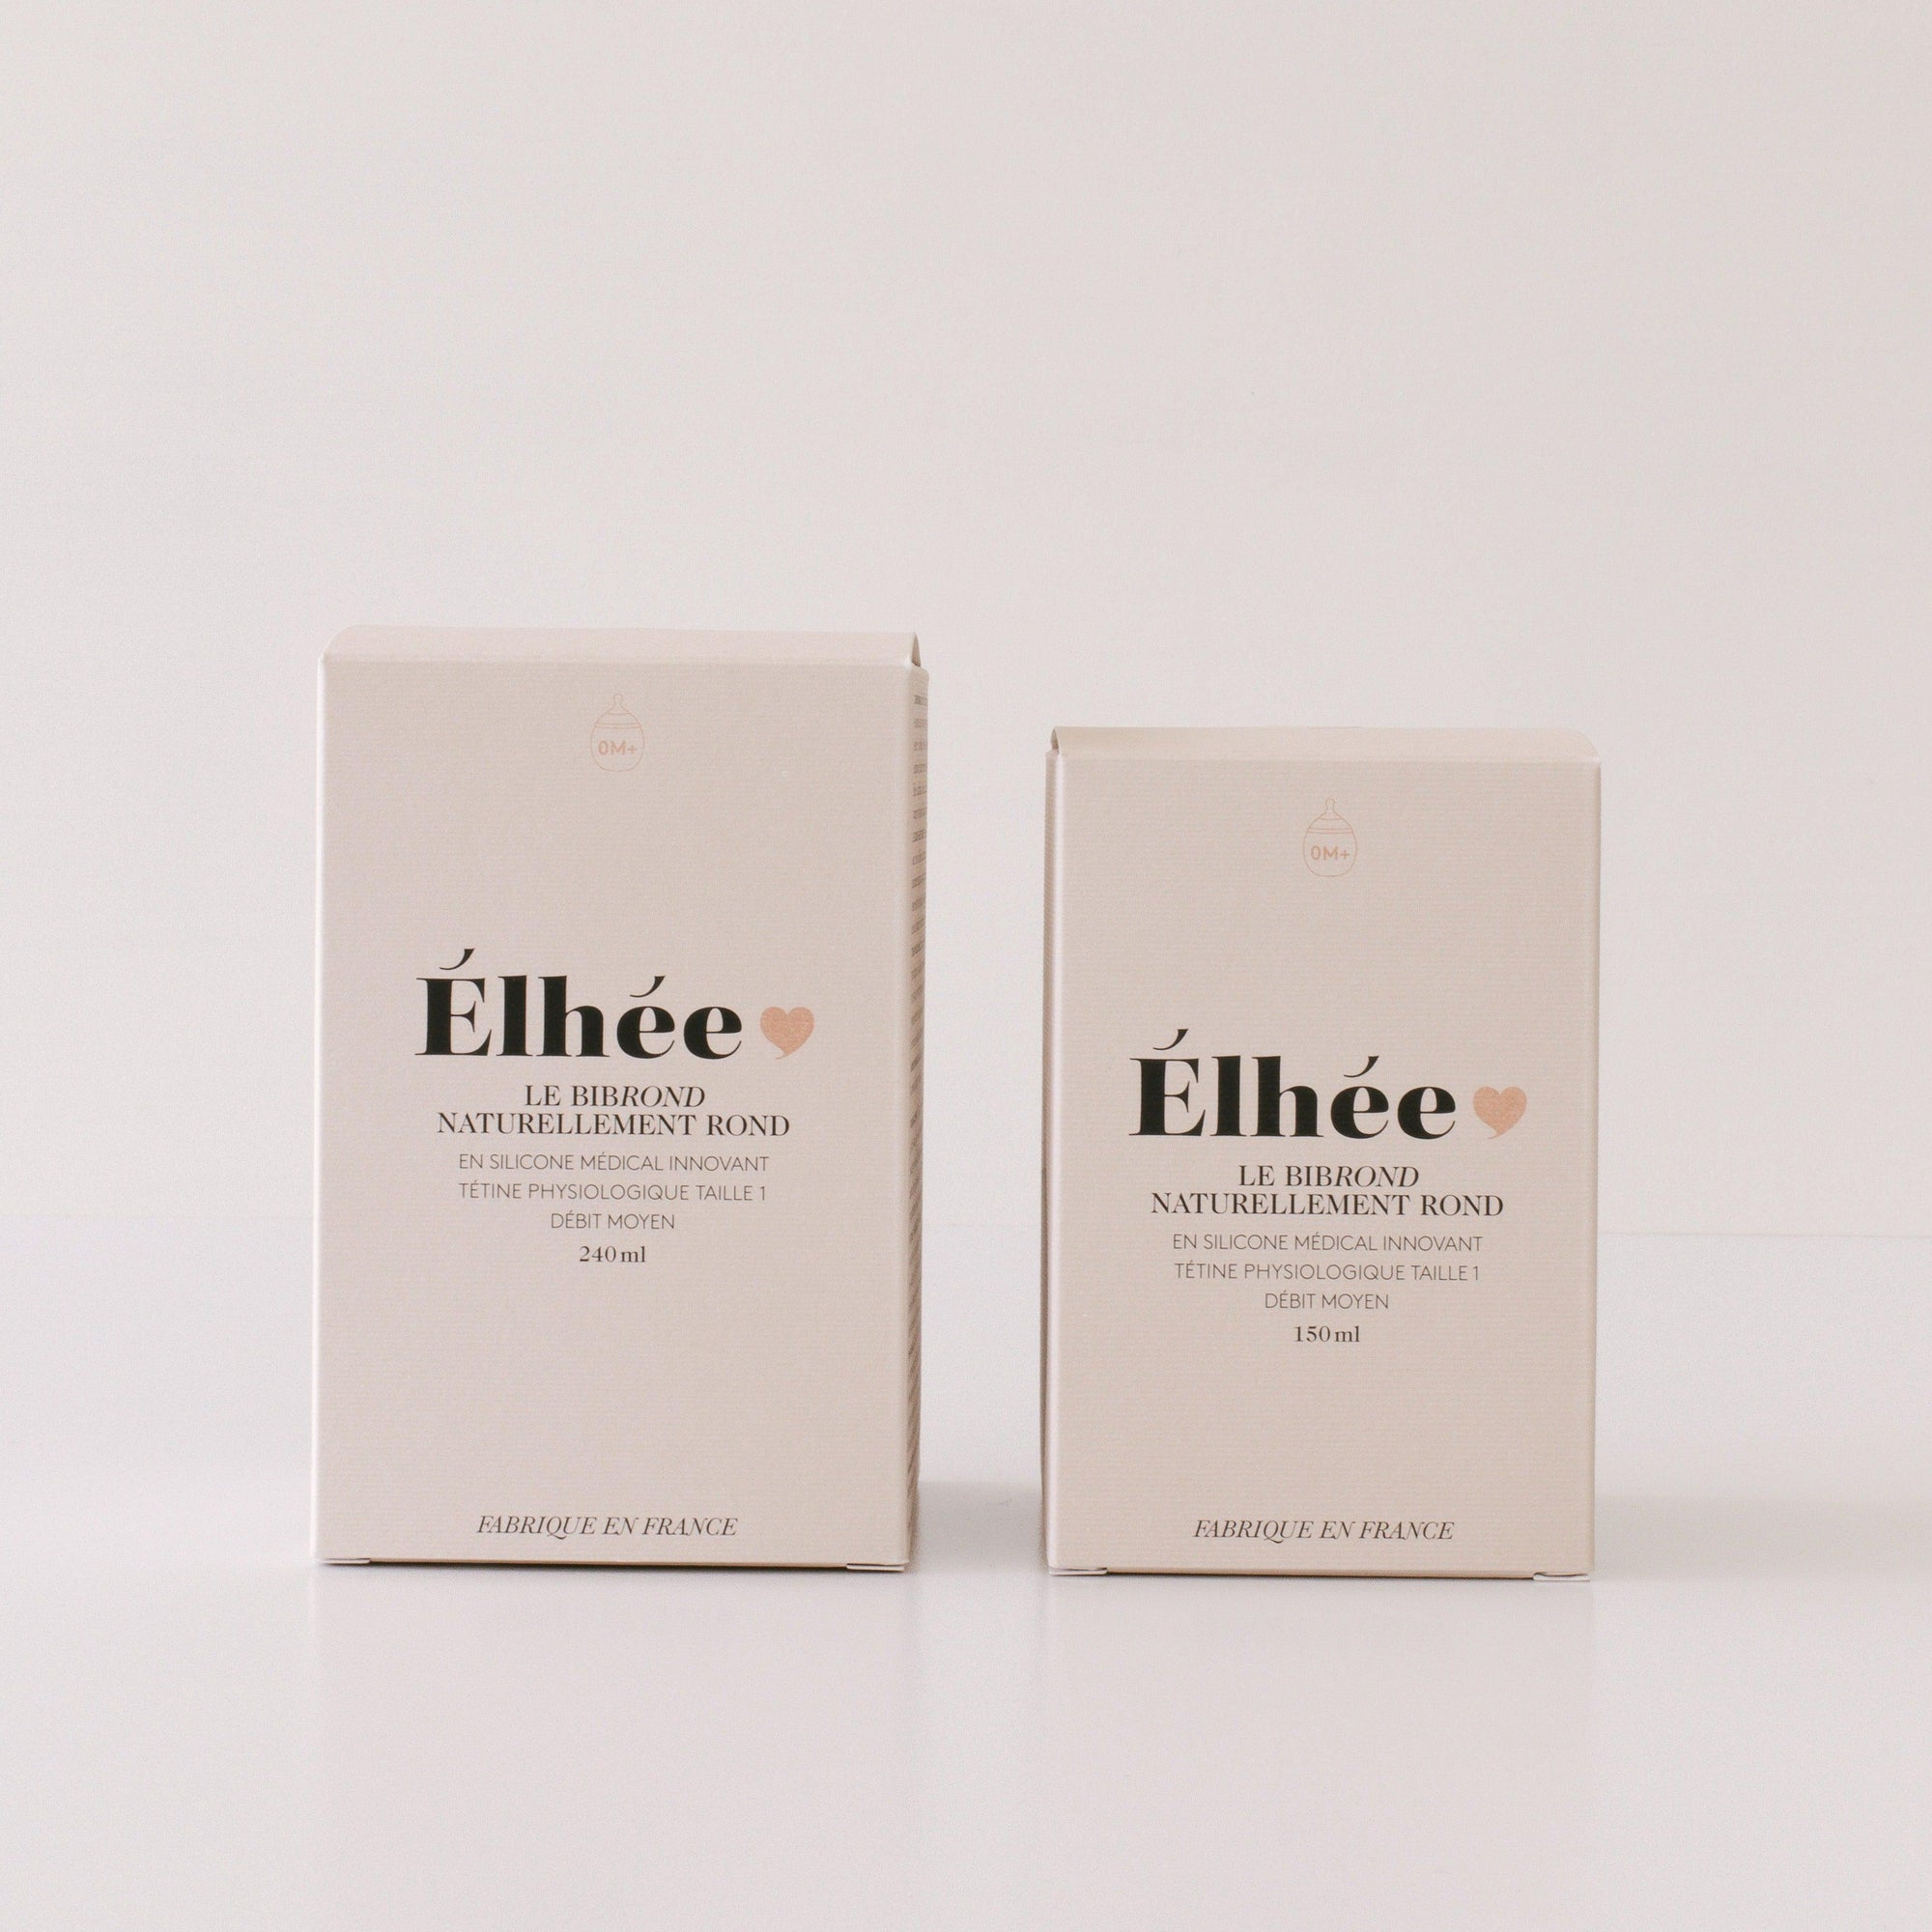 Two bibrond milk baby bottle boxes by Elhée France.